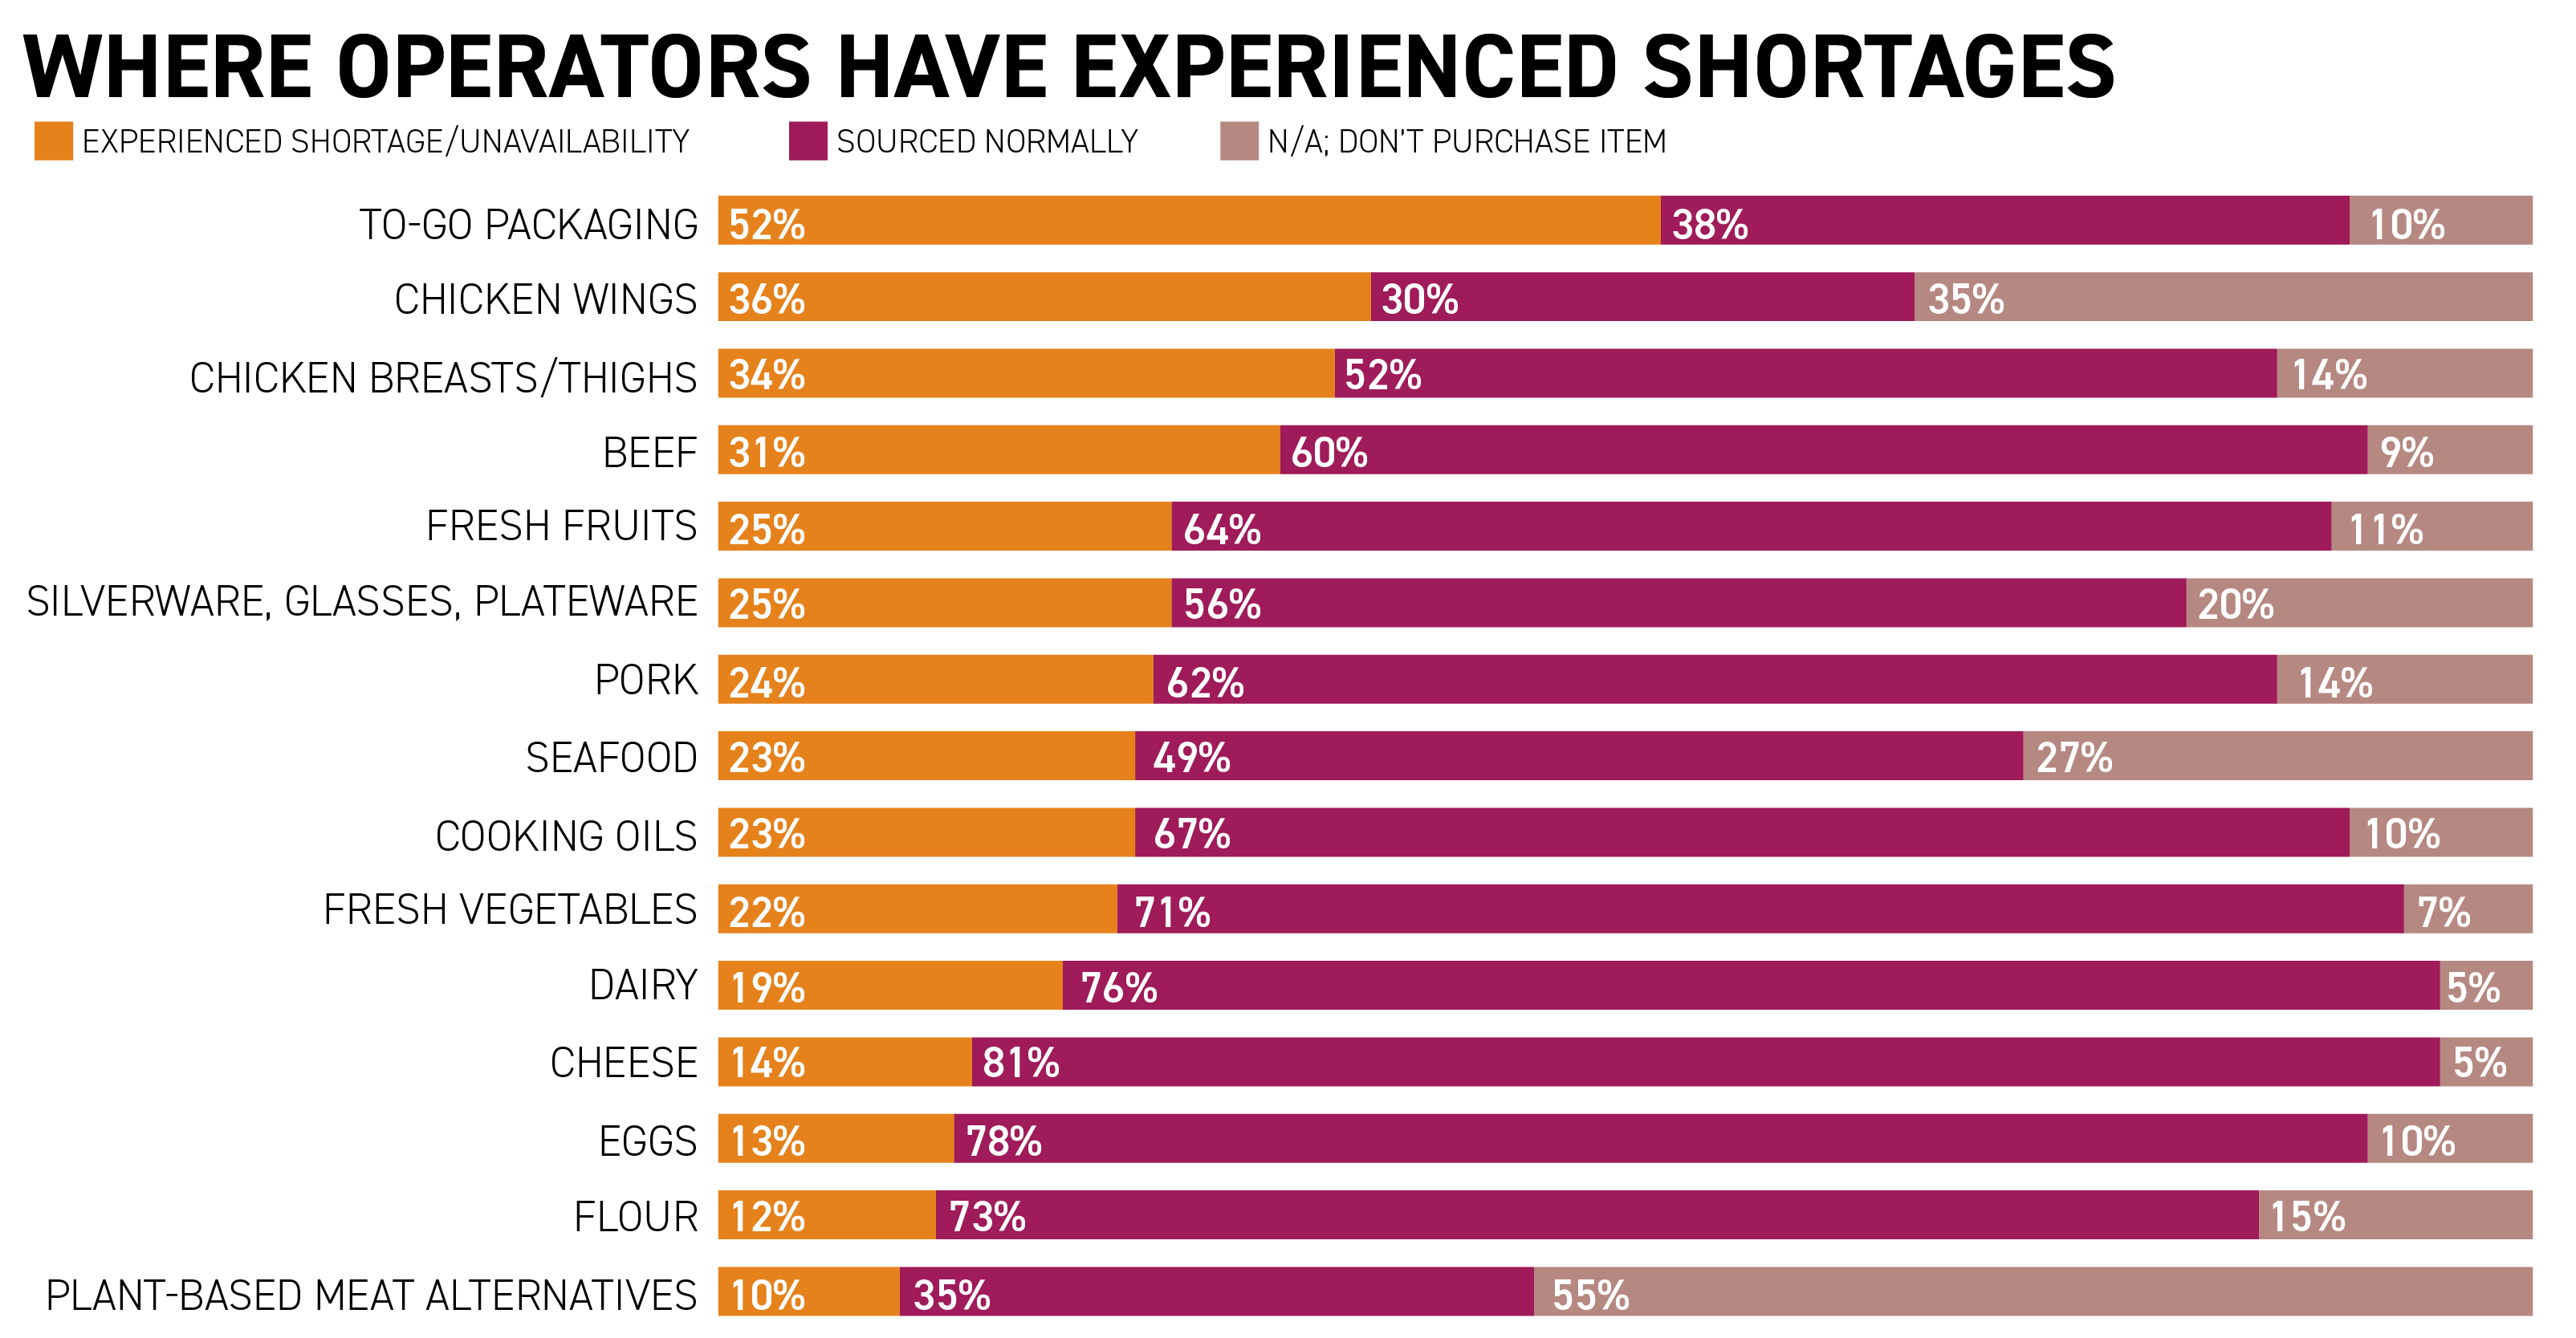 where-operators-have-experienced-shortages-01.png